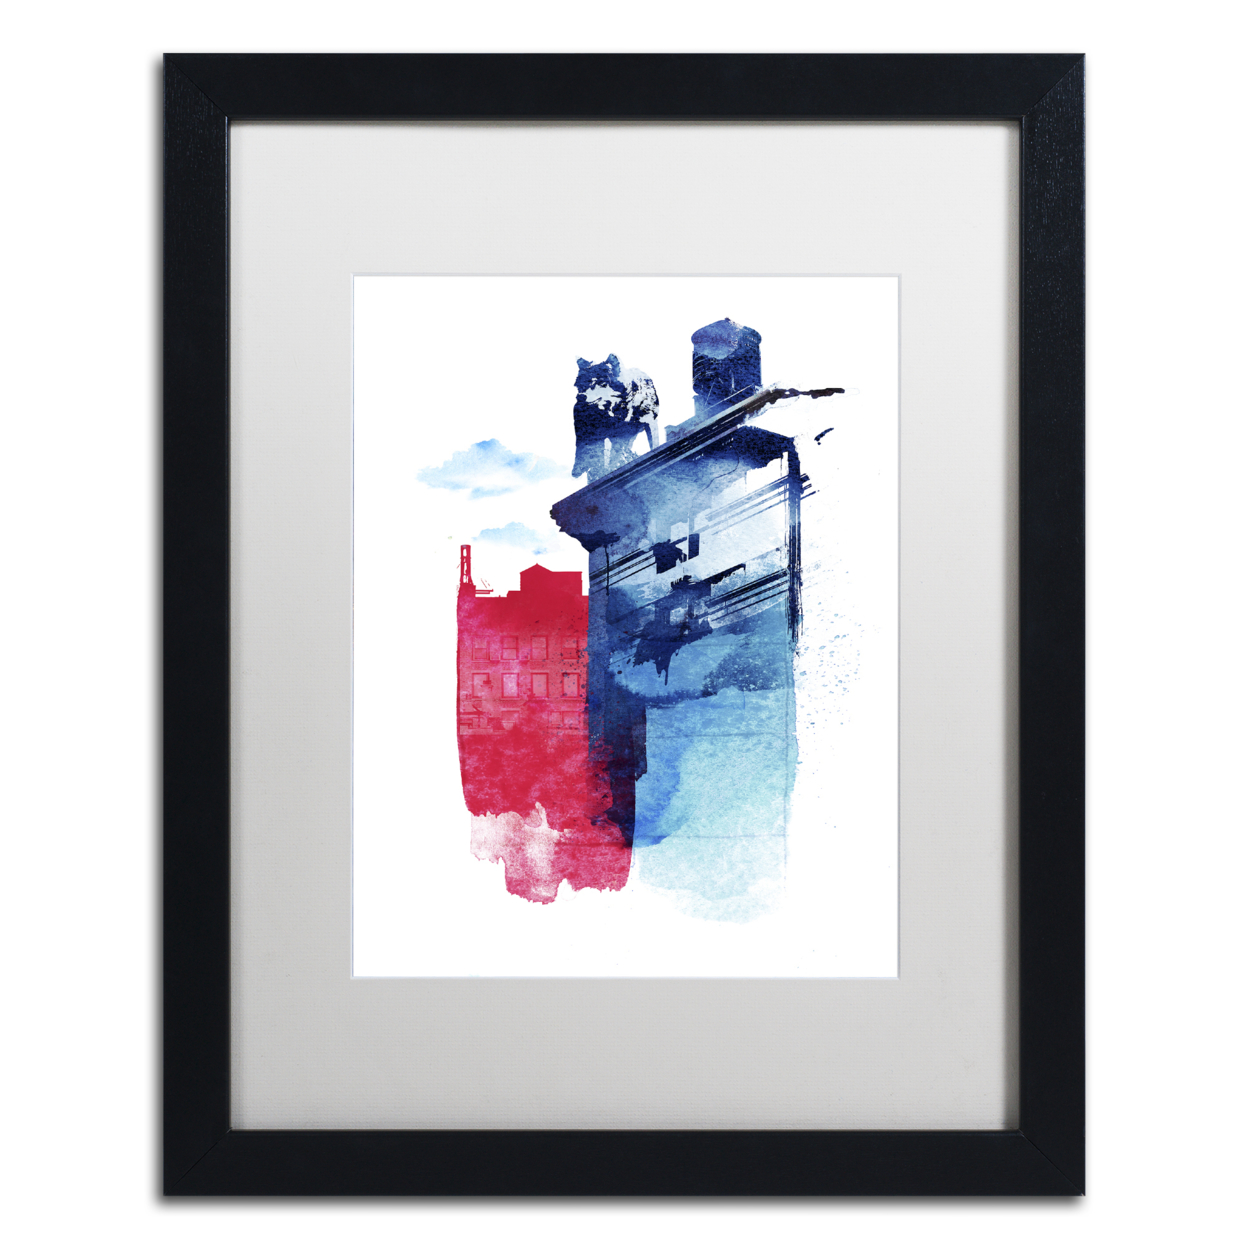 Robert Farkas 'This Is My Town' Black Wooden Framed Art 18 X 22 Inches